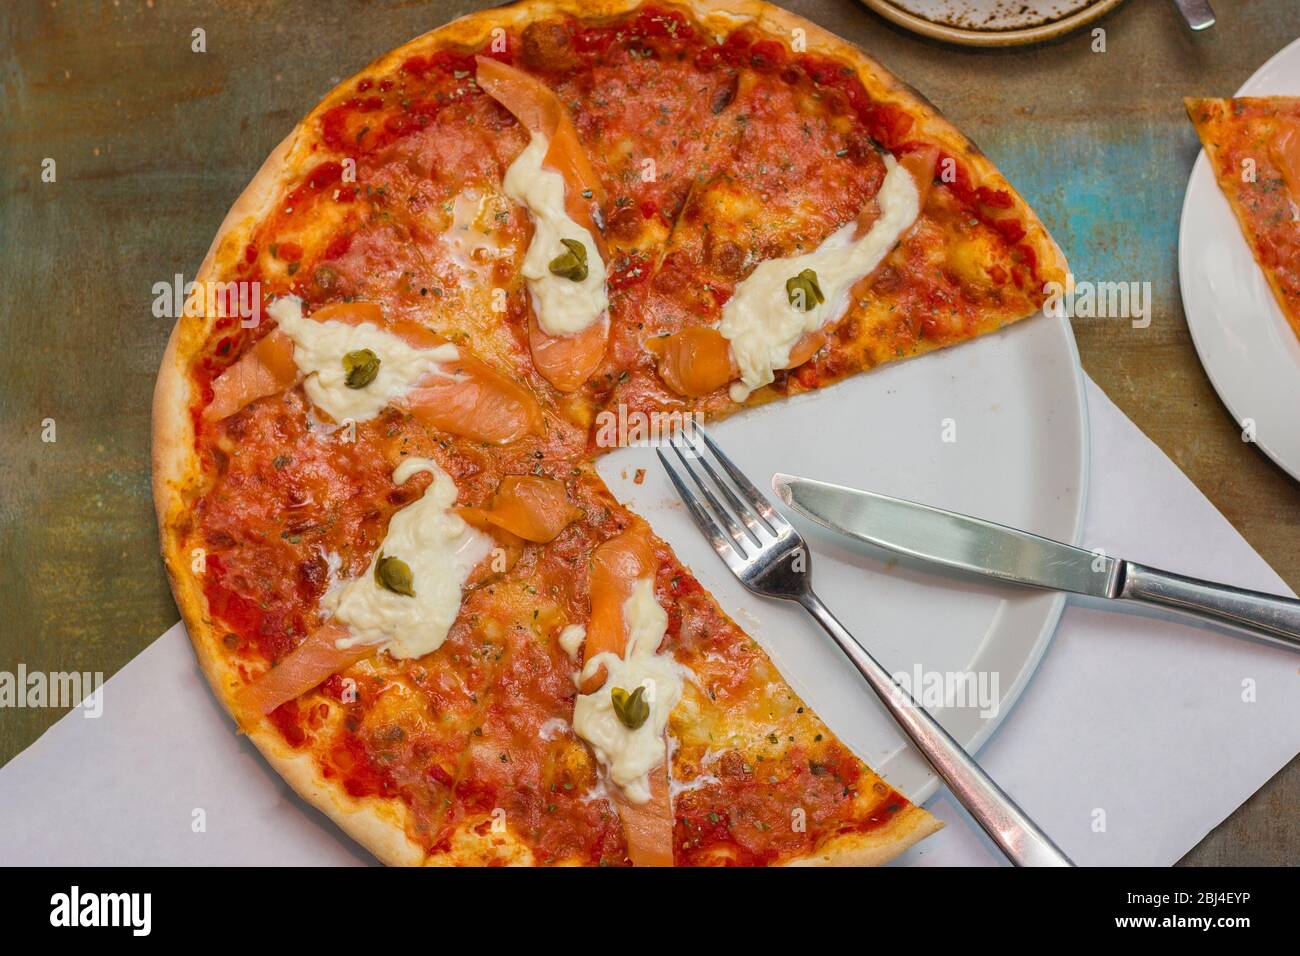 Pizza with red fish and cheese Stock Photo